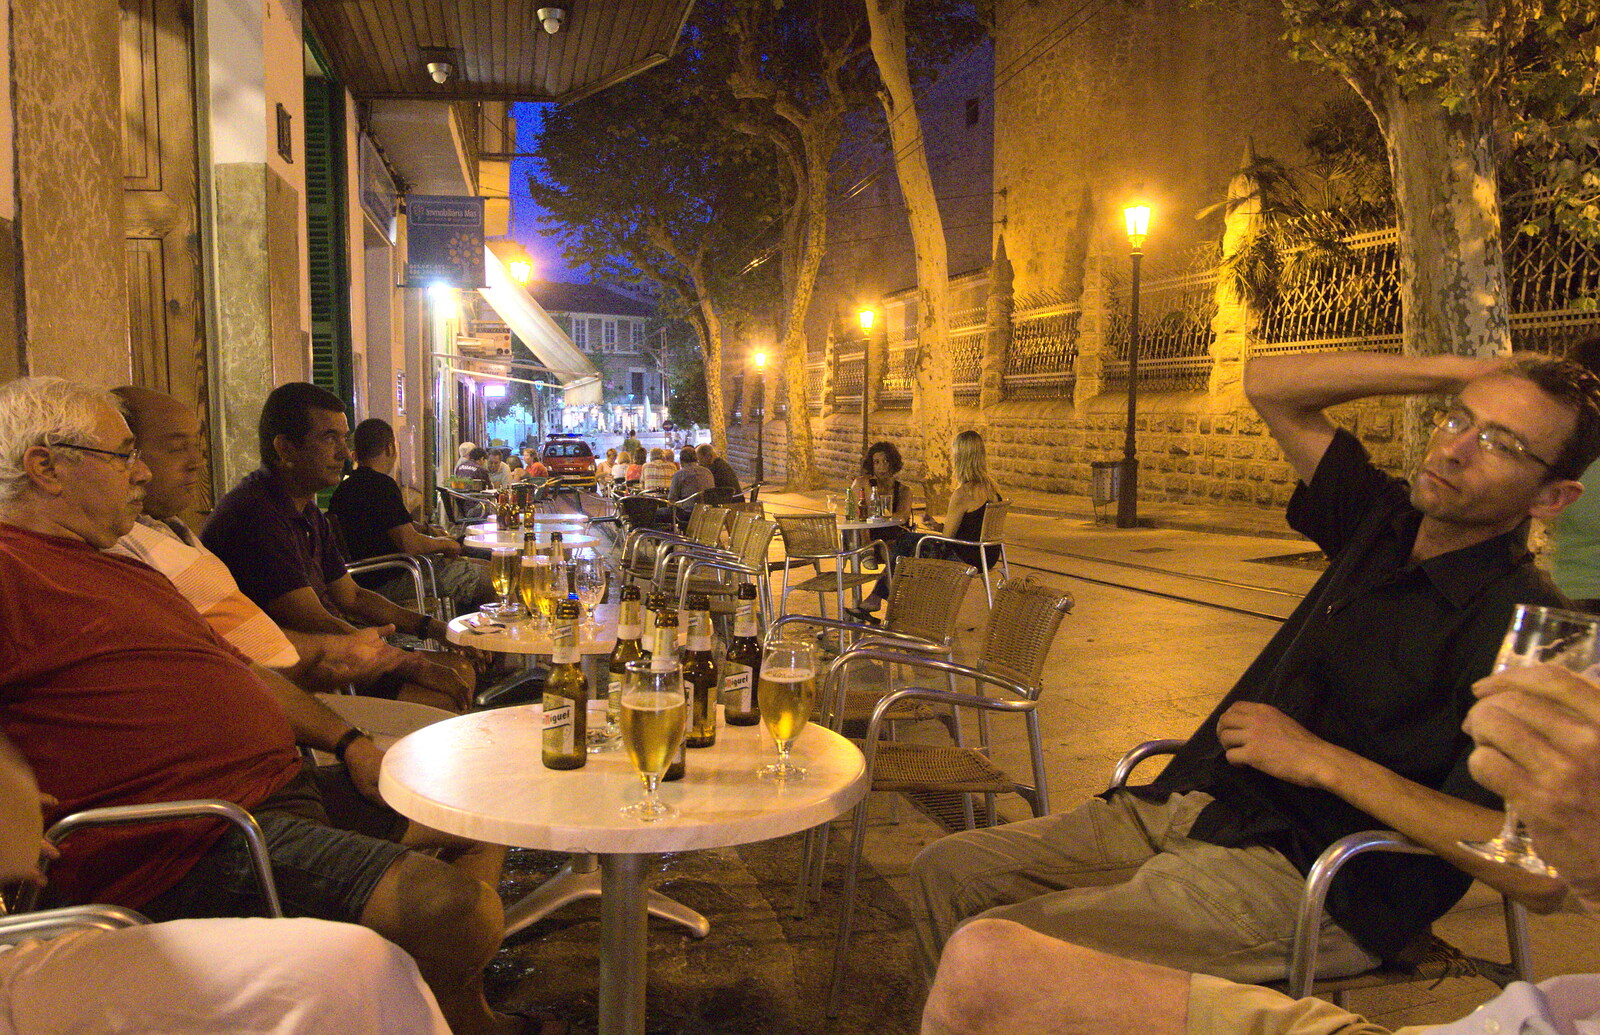 We pause for a beer near the tram stop from A Trip to Sóller, Mallorca, Spain - 8th-14th September 2012